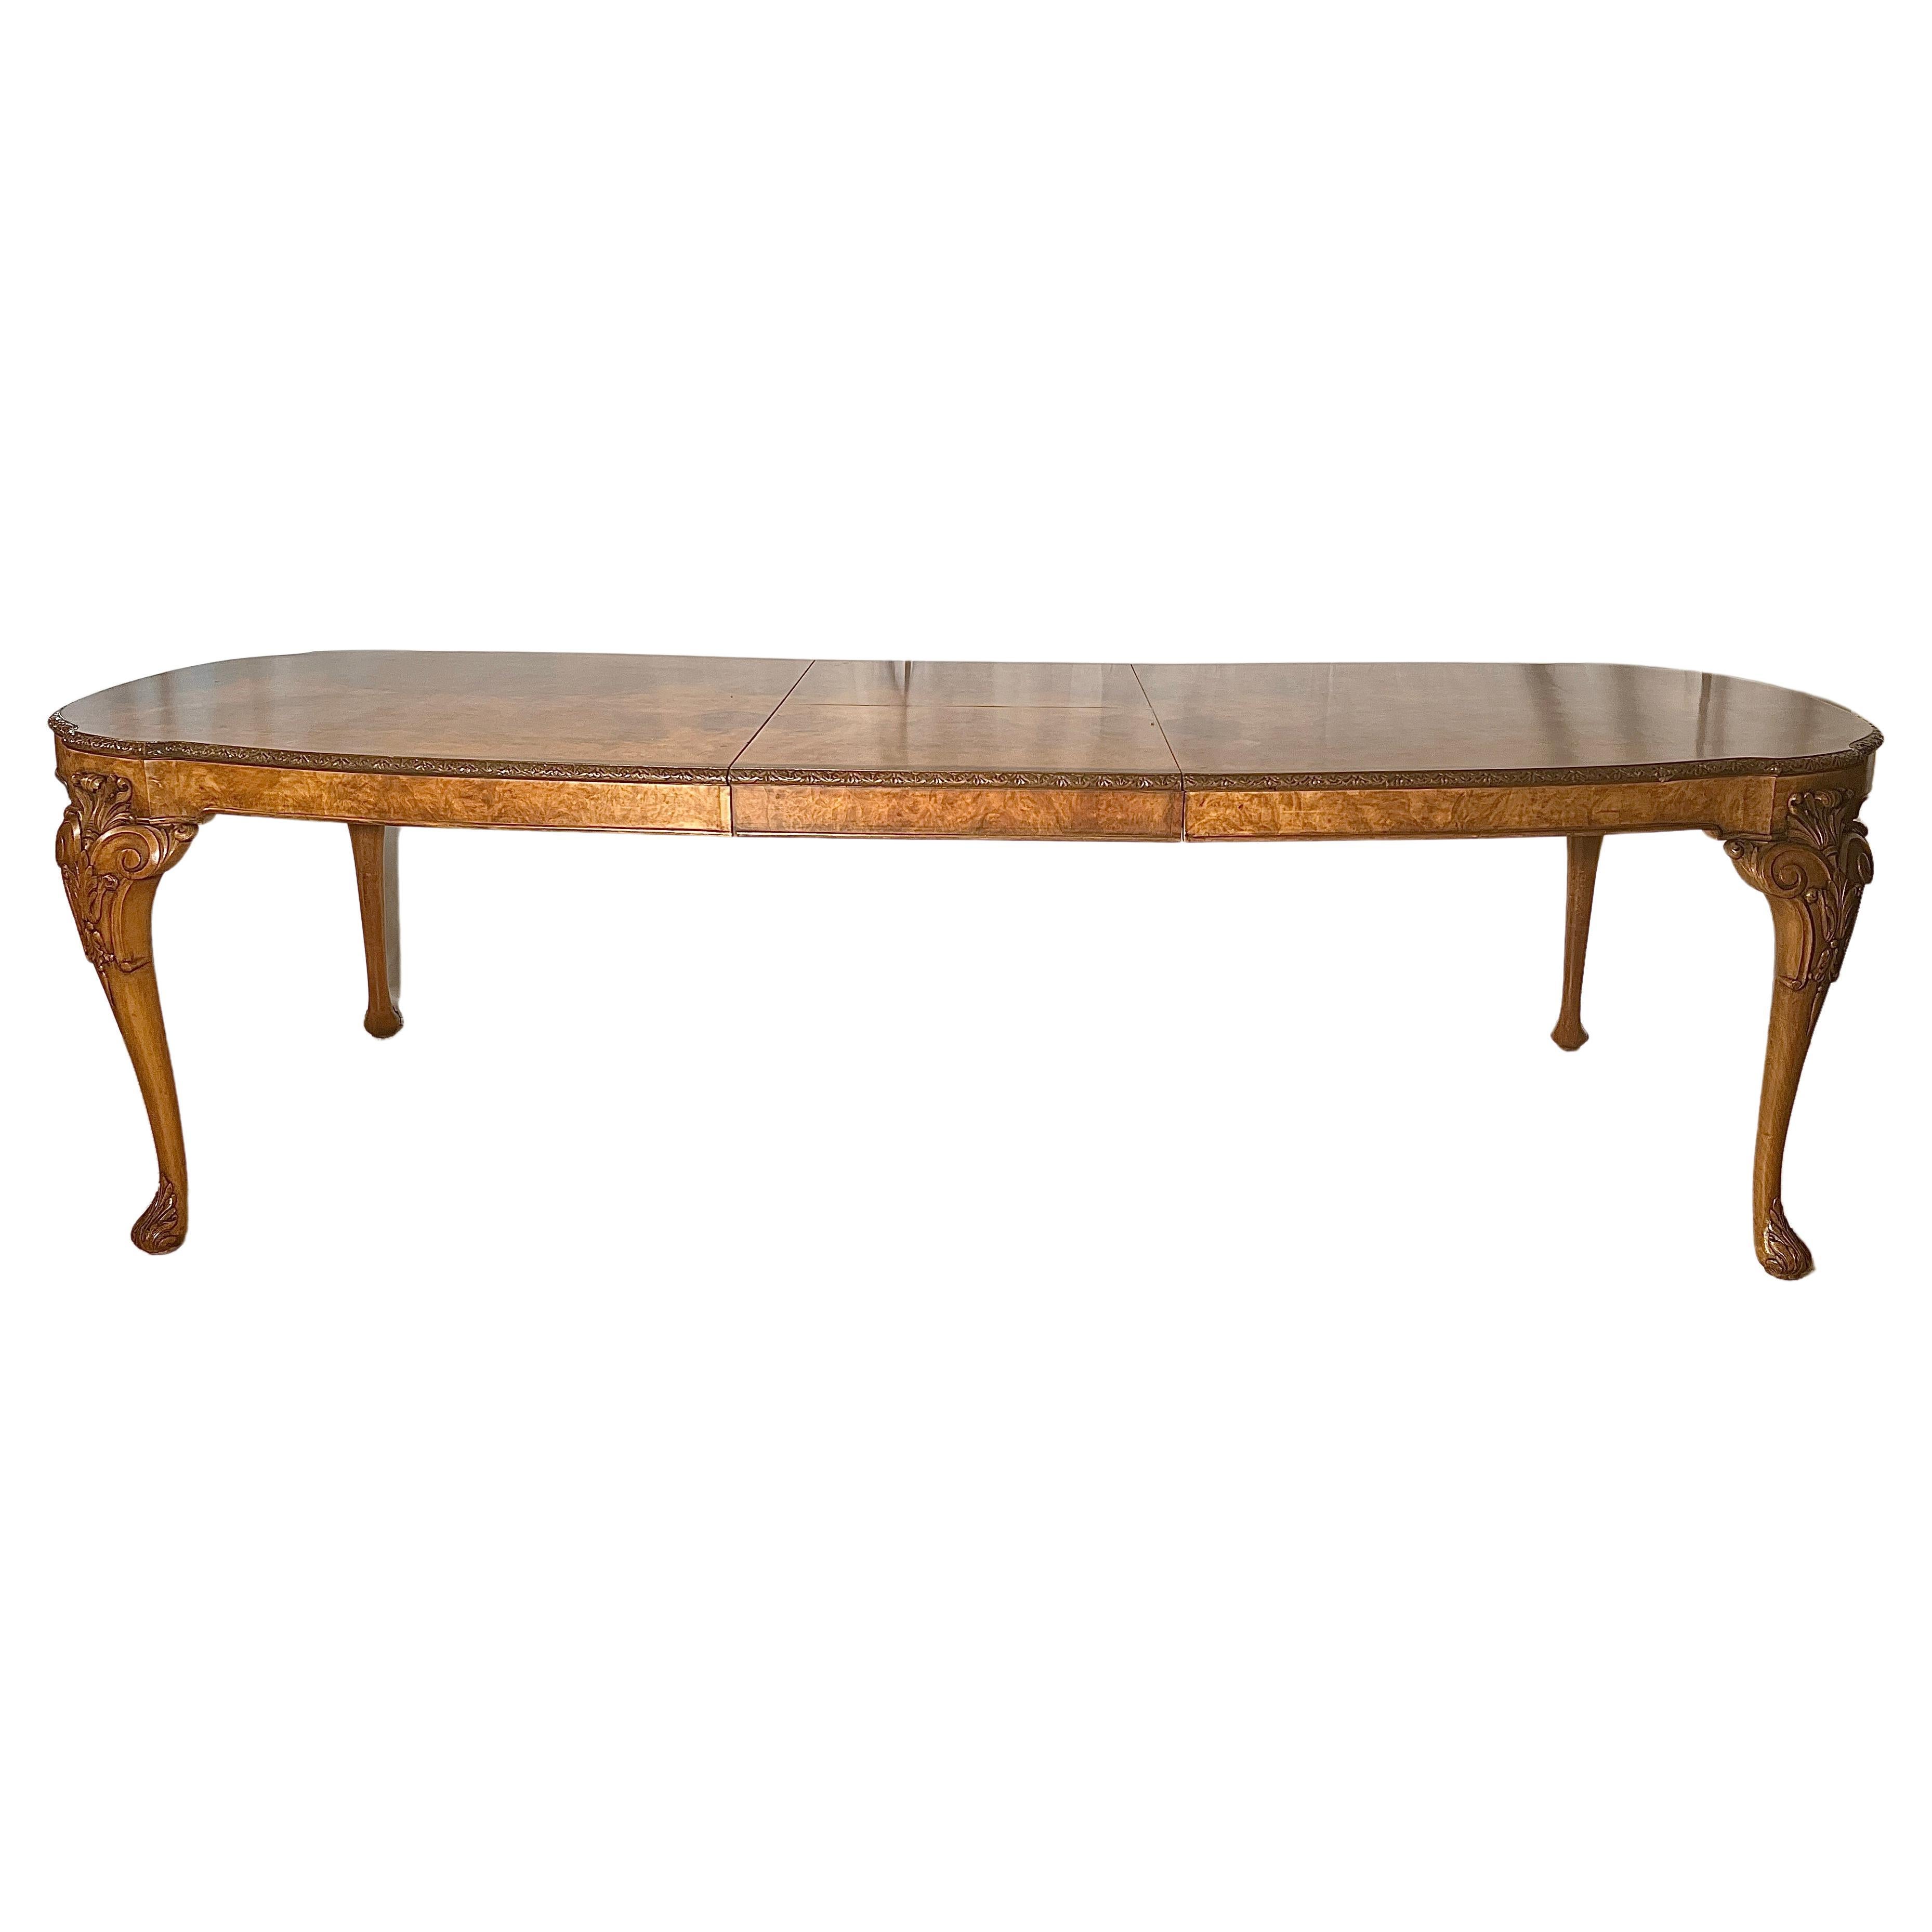 Antique English Carved Burled Walnut Dining Table with Interior Leaf, Circa 1900 For Sale